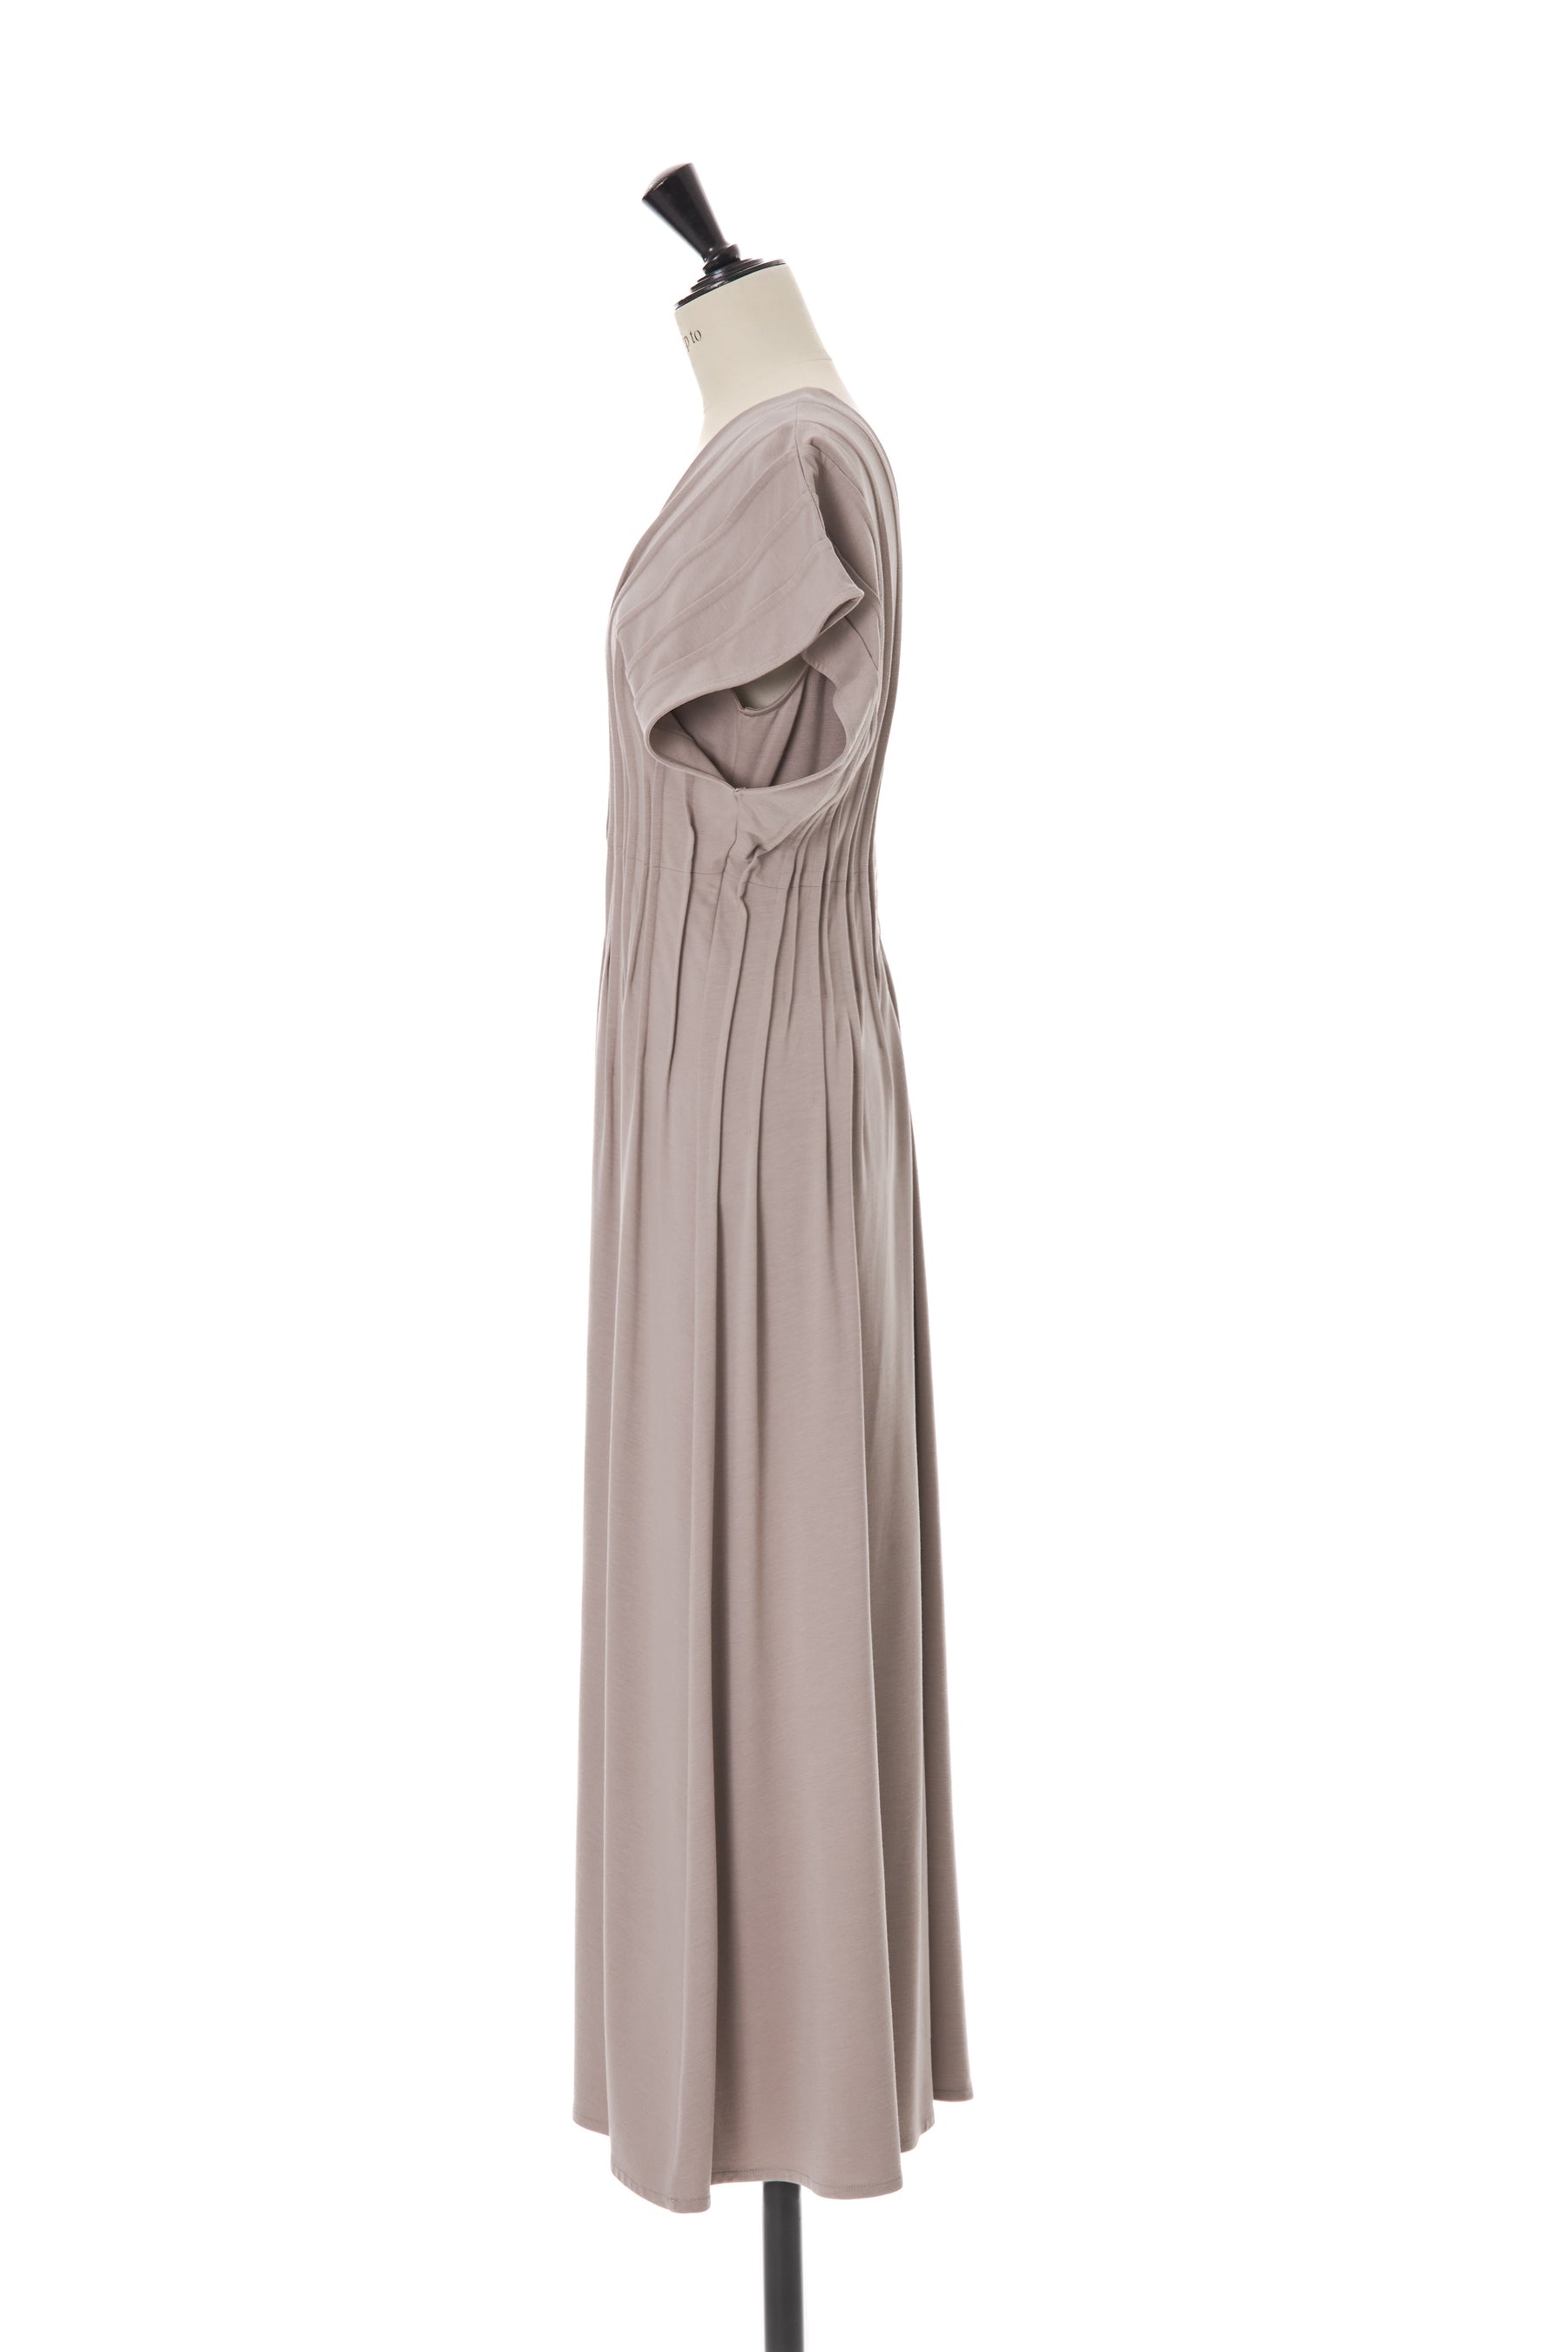 [Shipping in mid-July] Ambient Long Dress